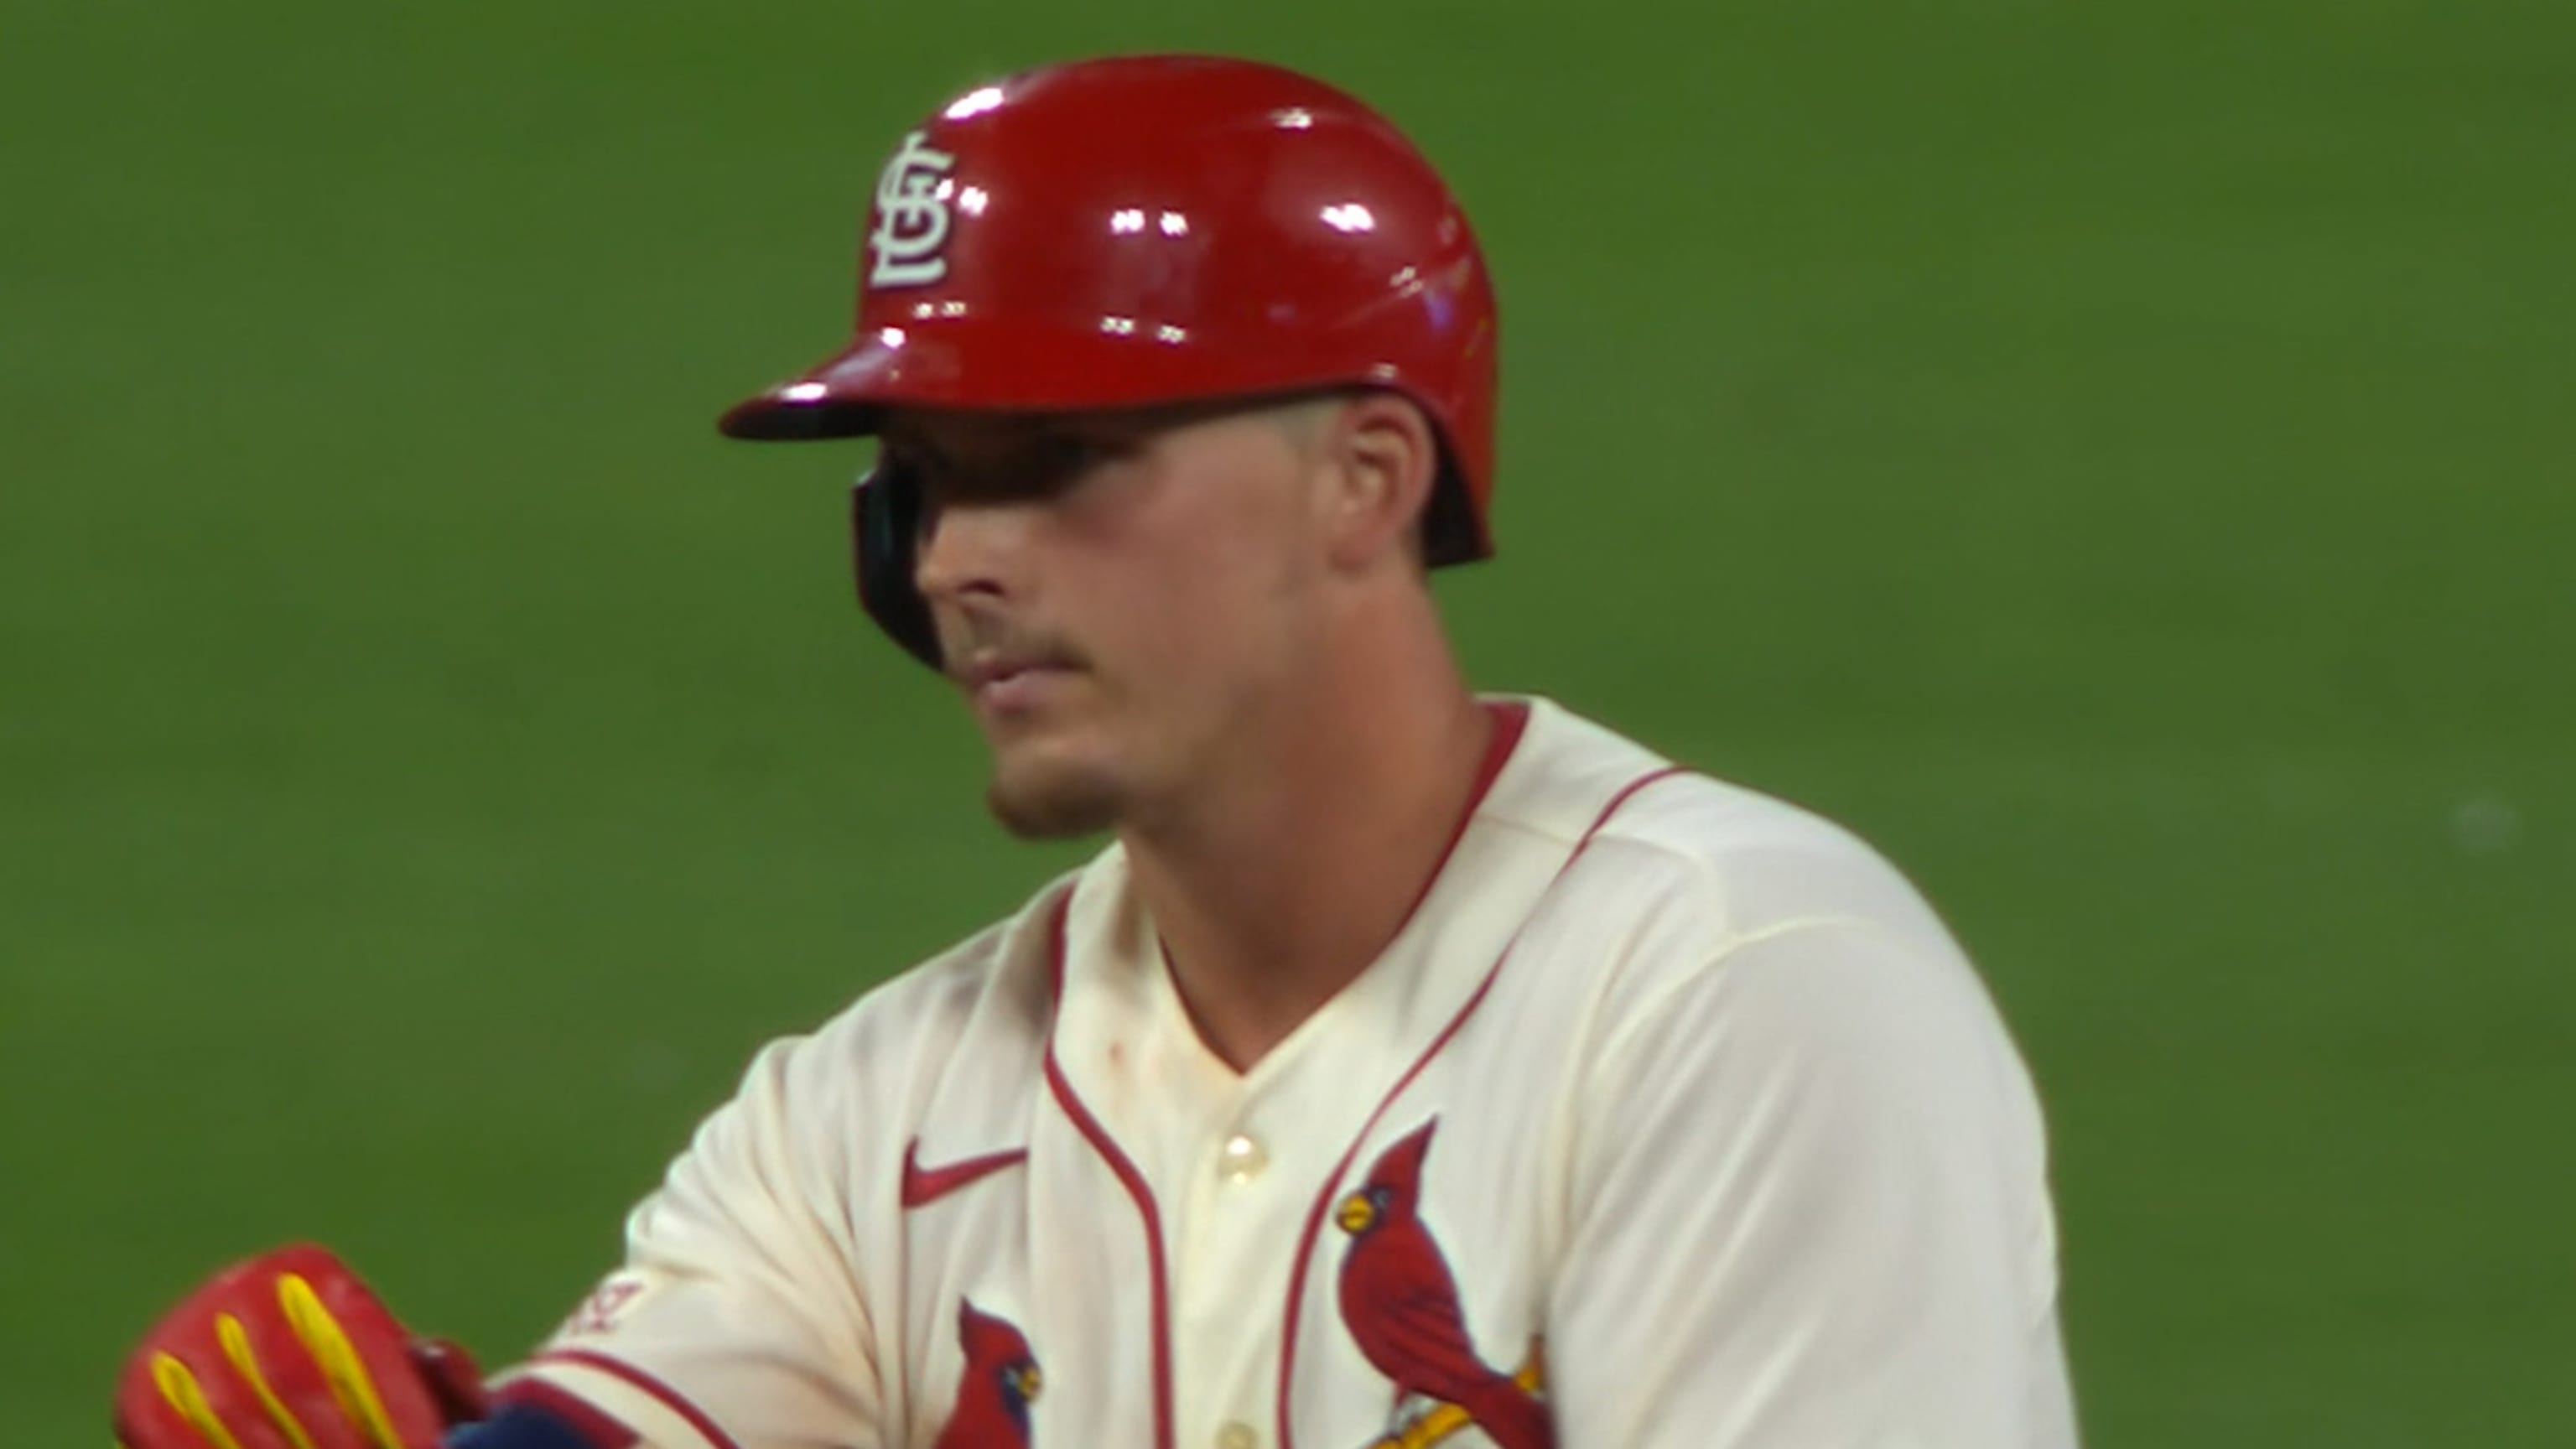 Alec Burleson's pivotal catch overshadows his 3-hit game and a home run in  a Cardinals win